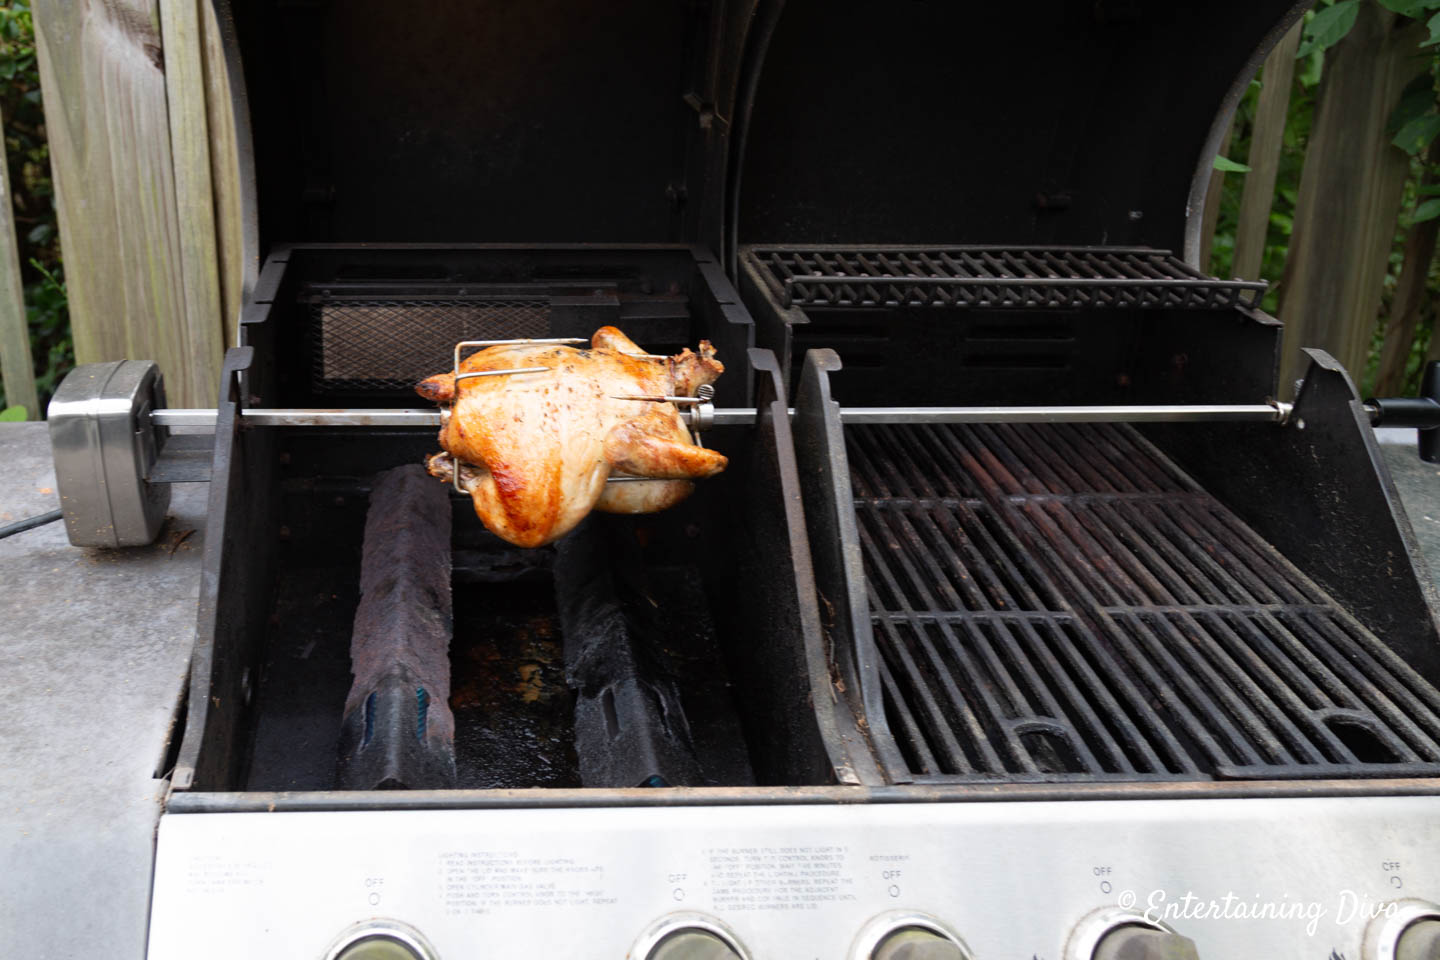 Rotisserie chicken on a spit in the grill